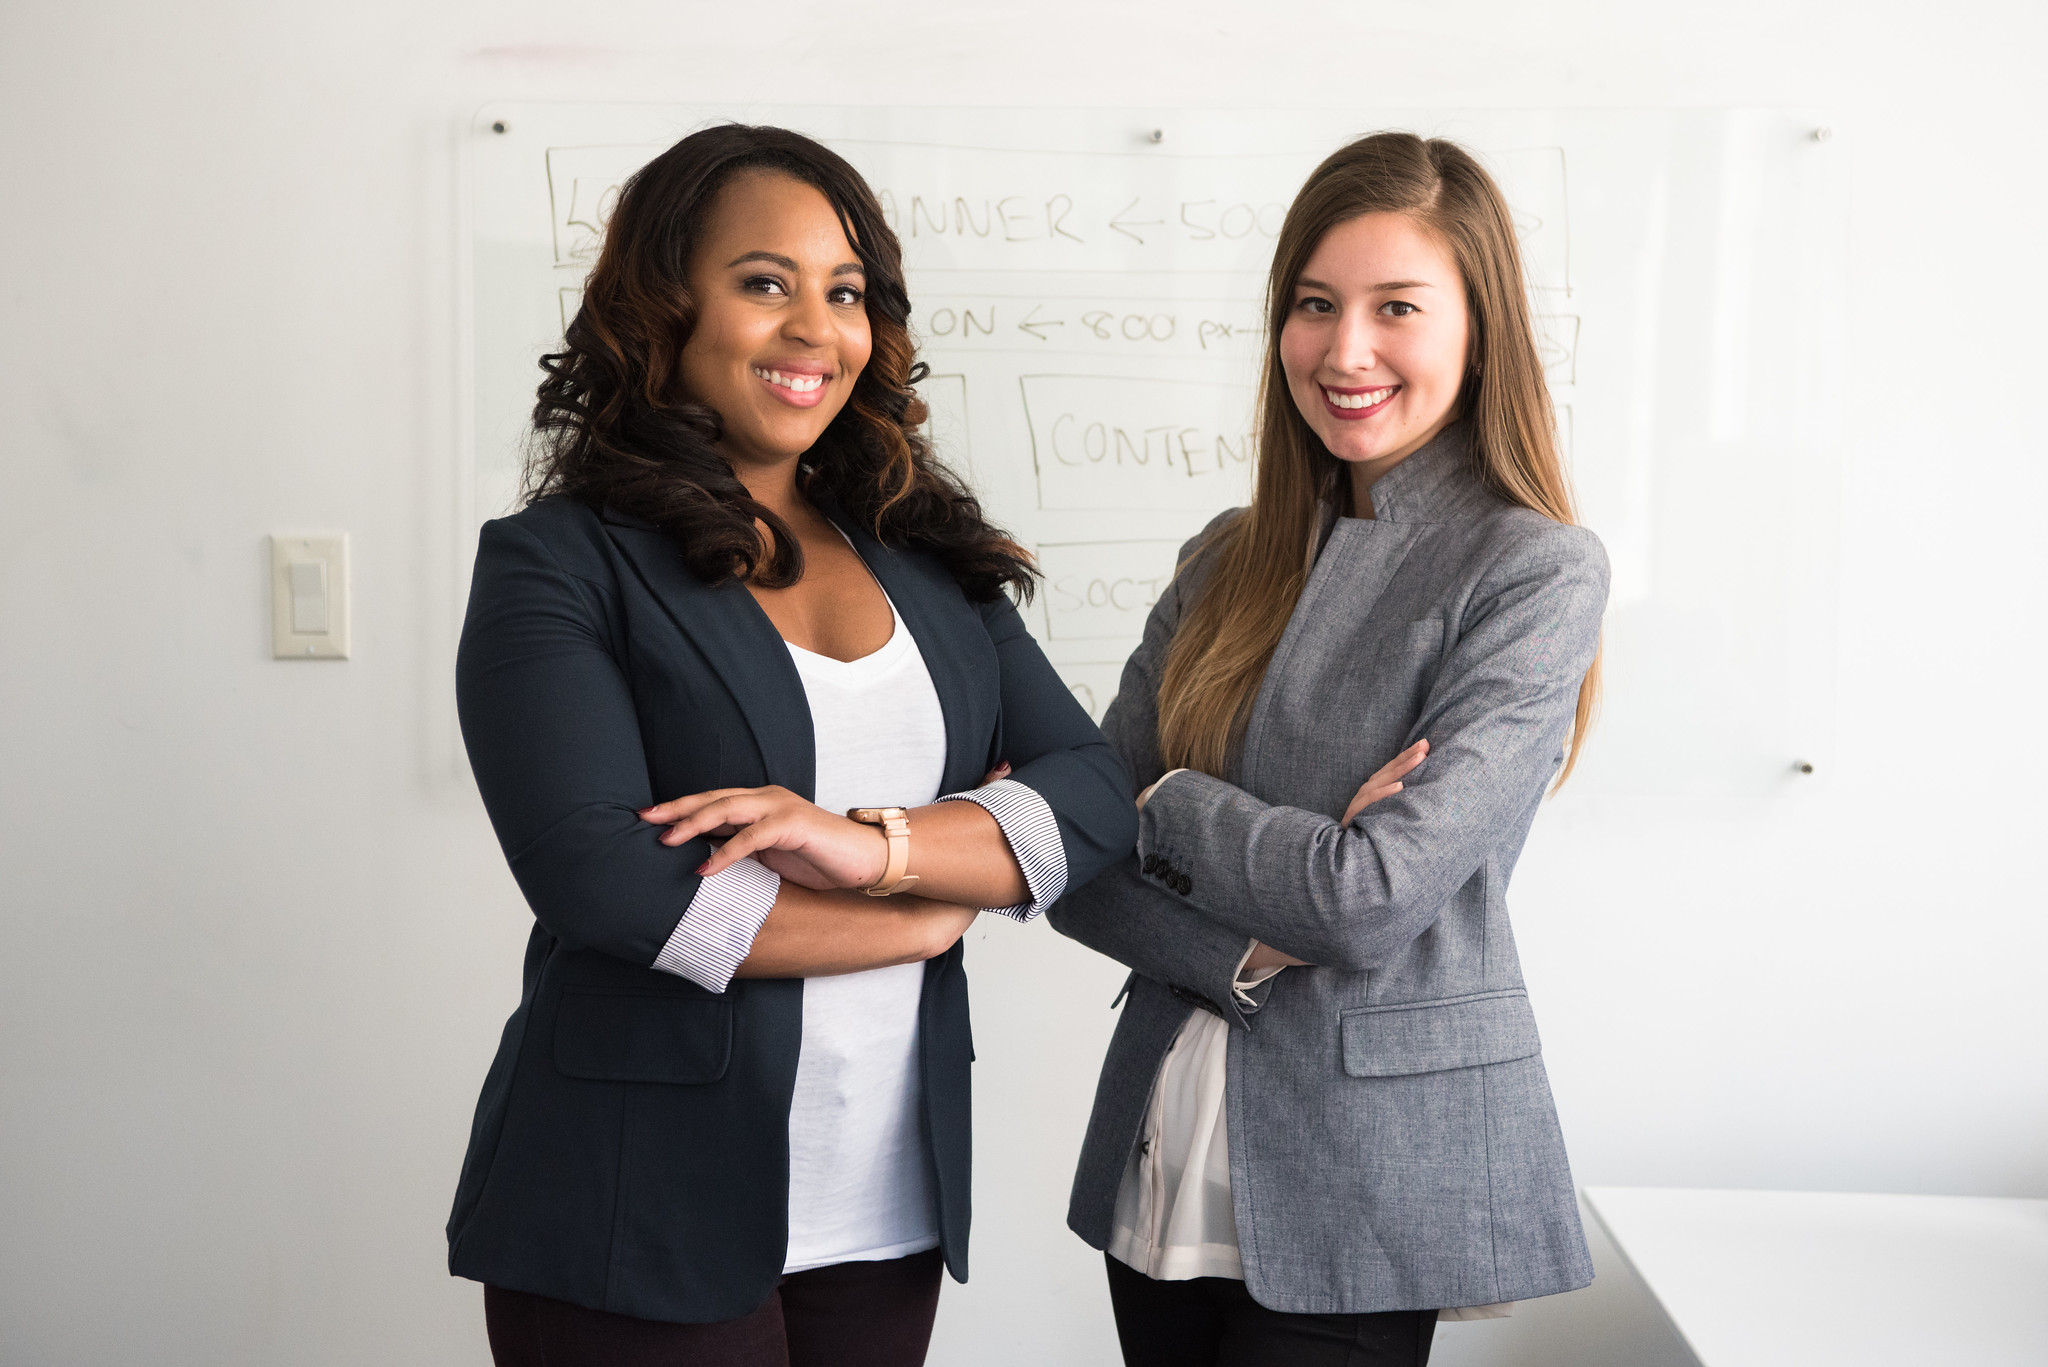 #WOCIT Two women standing in front of whiteboard with web design text written on it